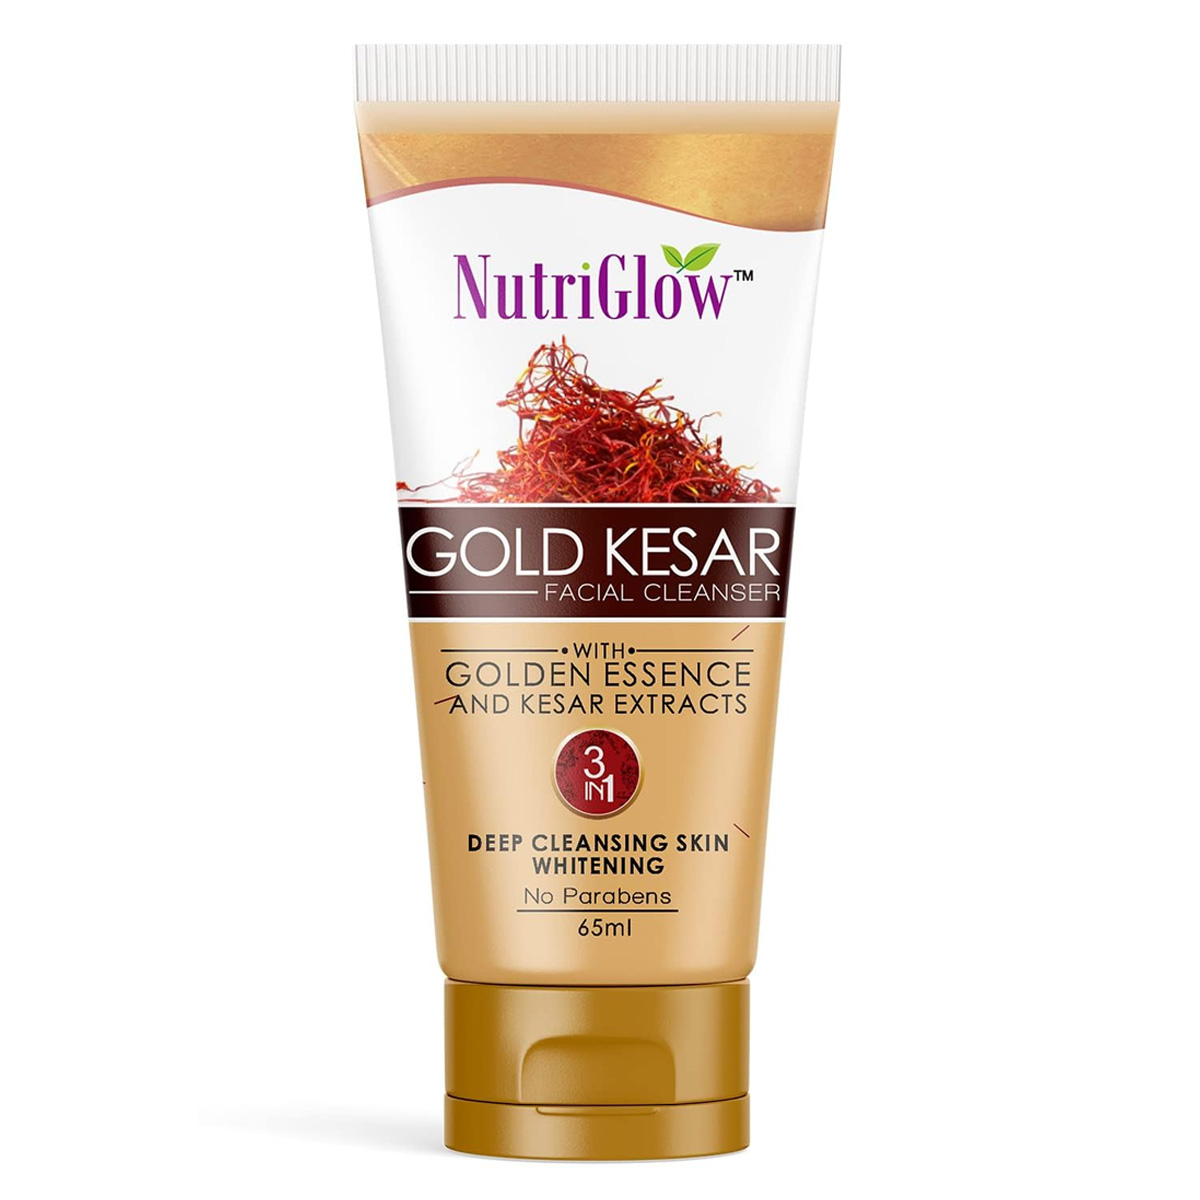 NutriGlow Gold Kesar Face Cleanser With Golden Essence & Kesar Extracts, 65ml